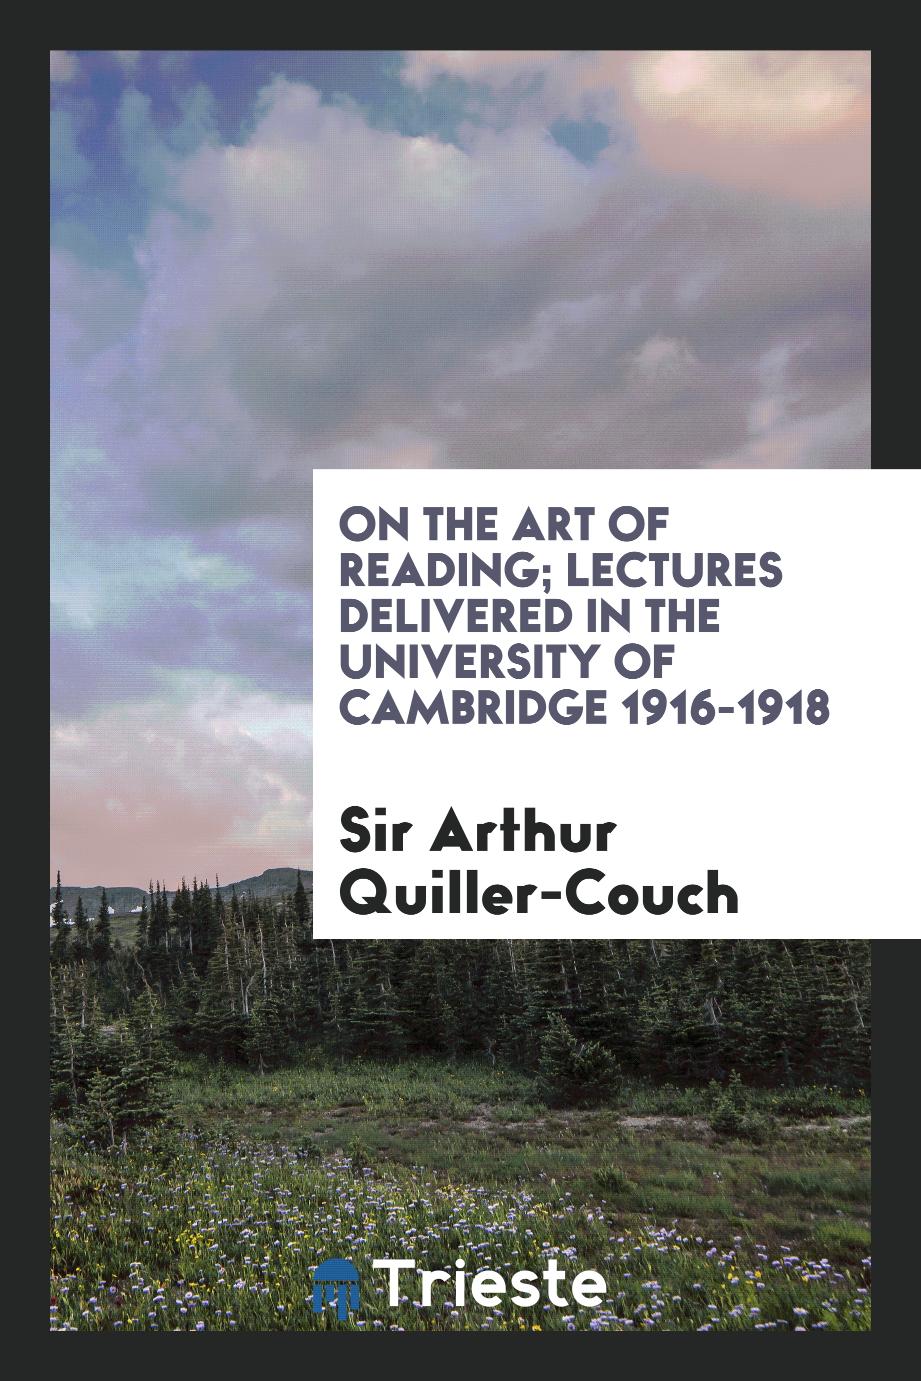 On the art of reading; Lectures delivered in the university of cambridge 1916-1918